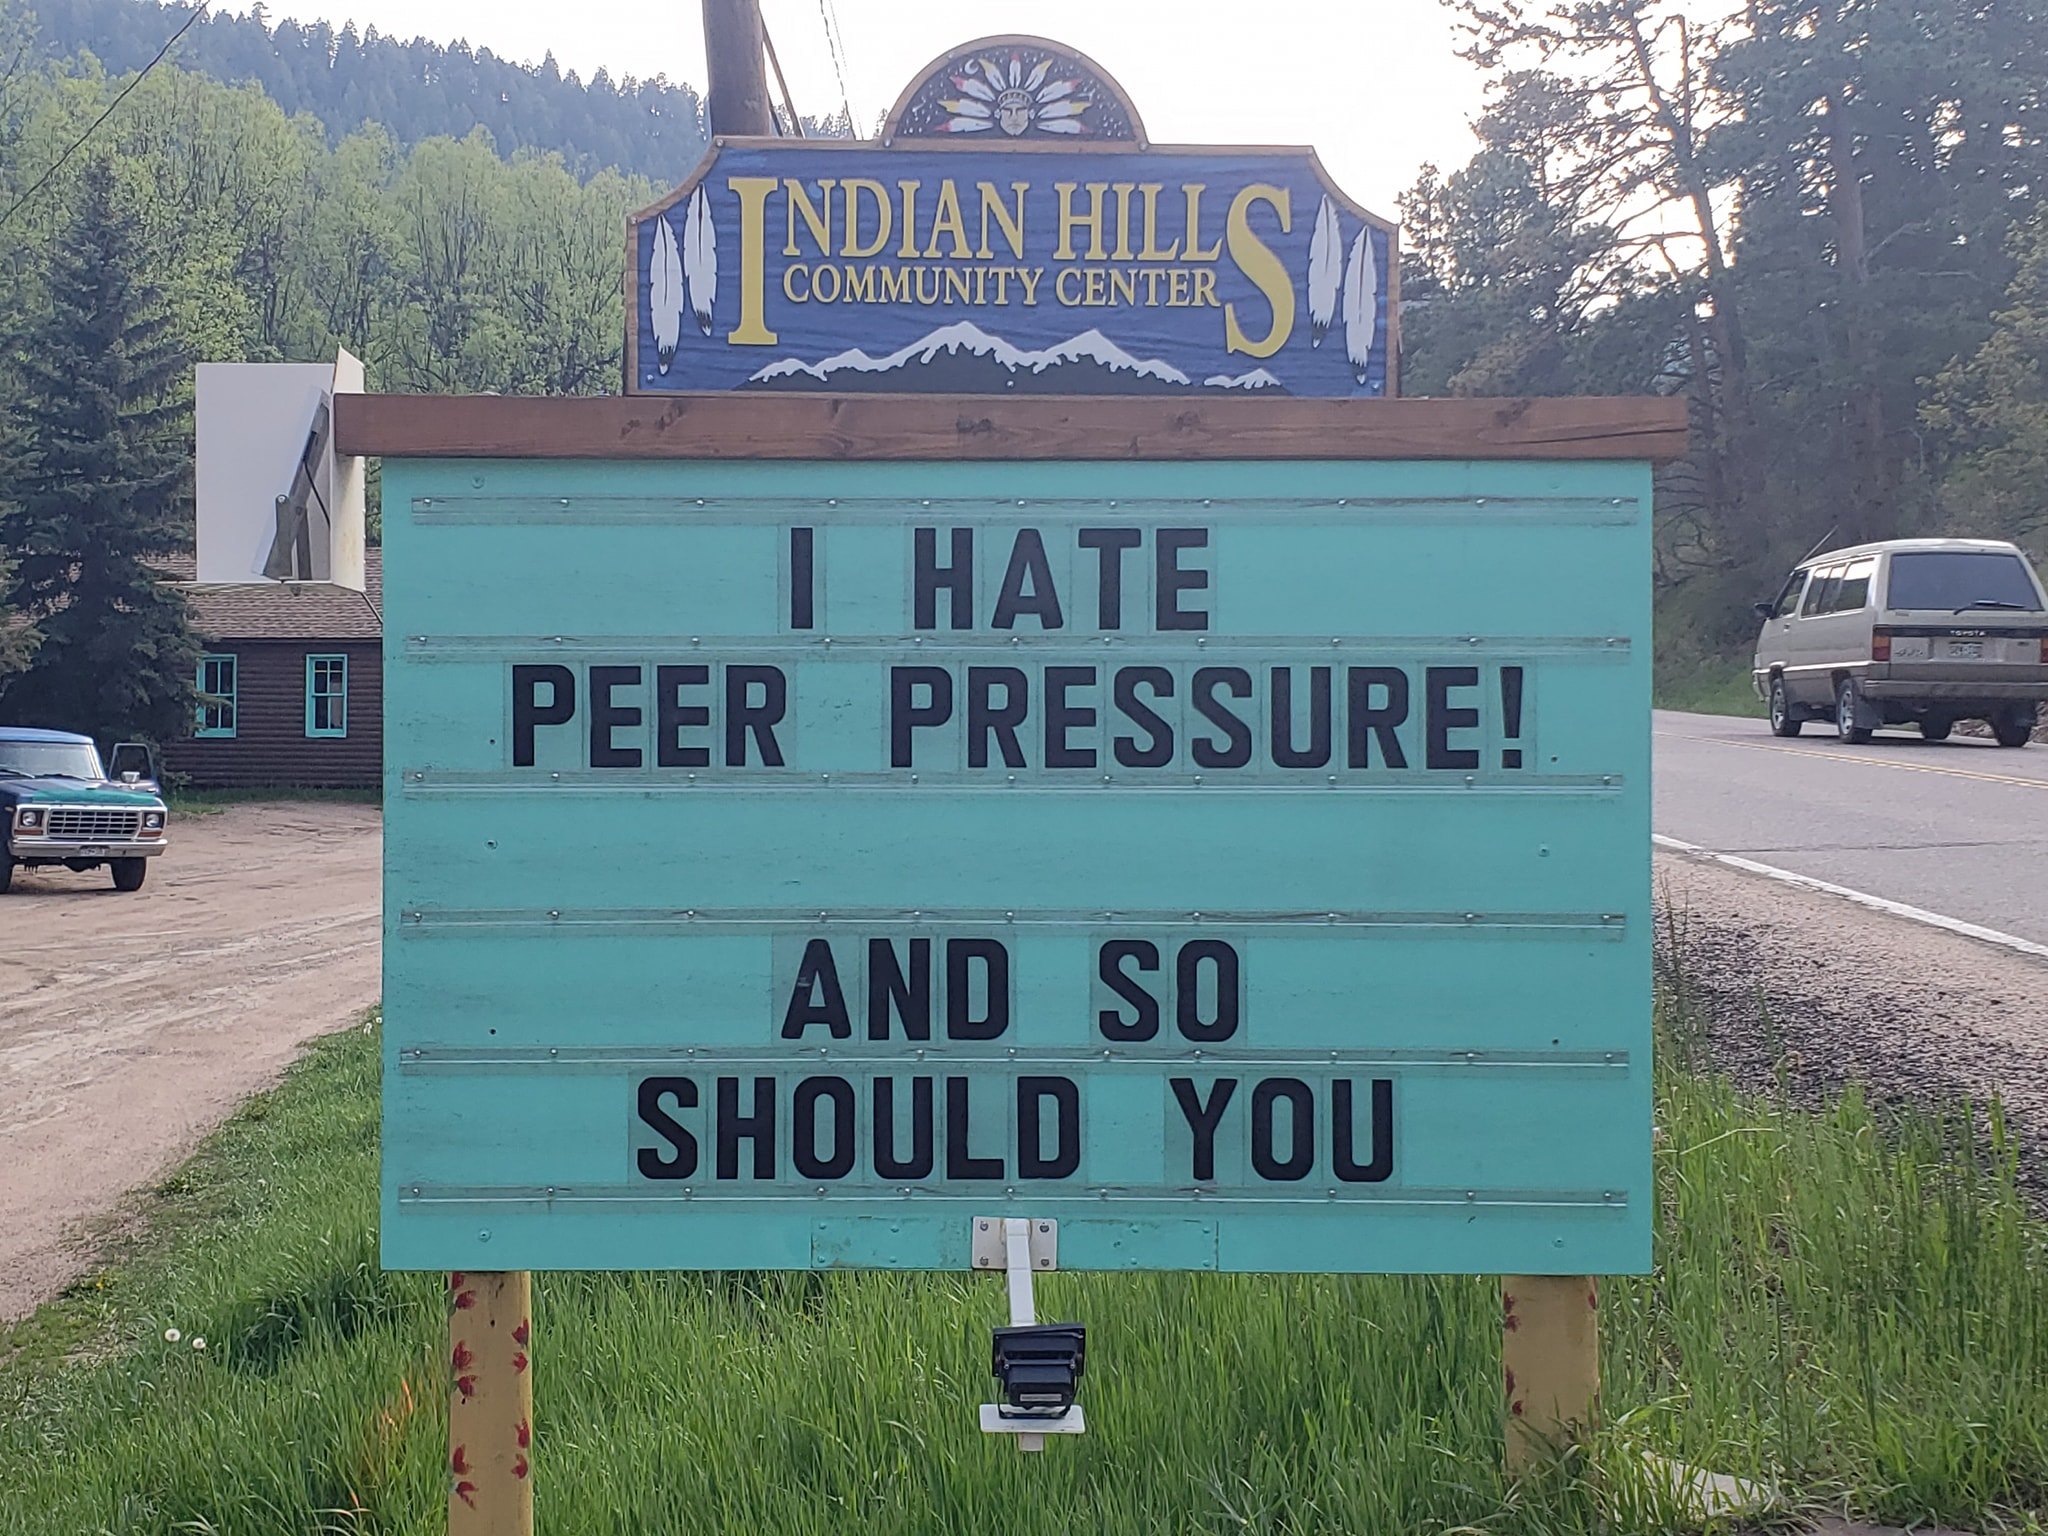 community sign that says: "I hate peer pressure! And so should you."